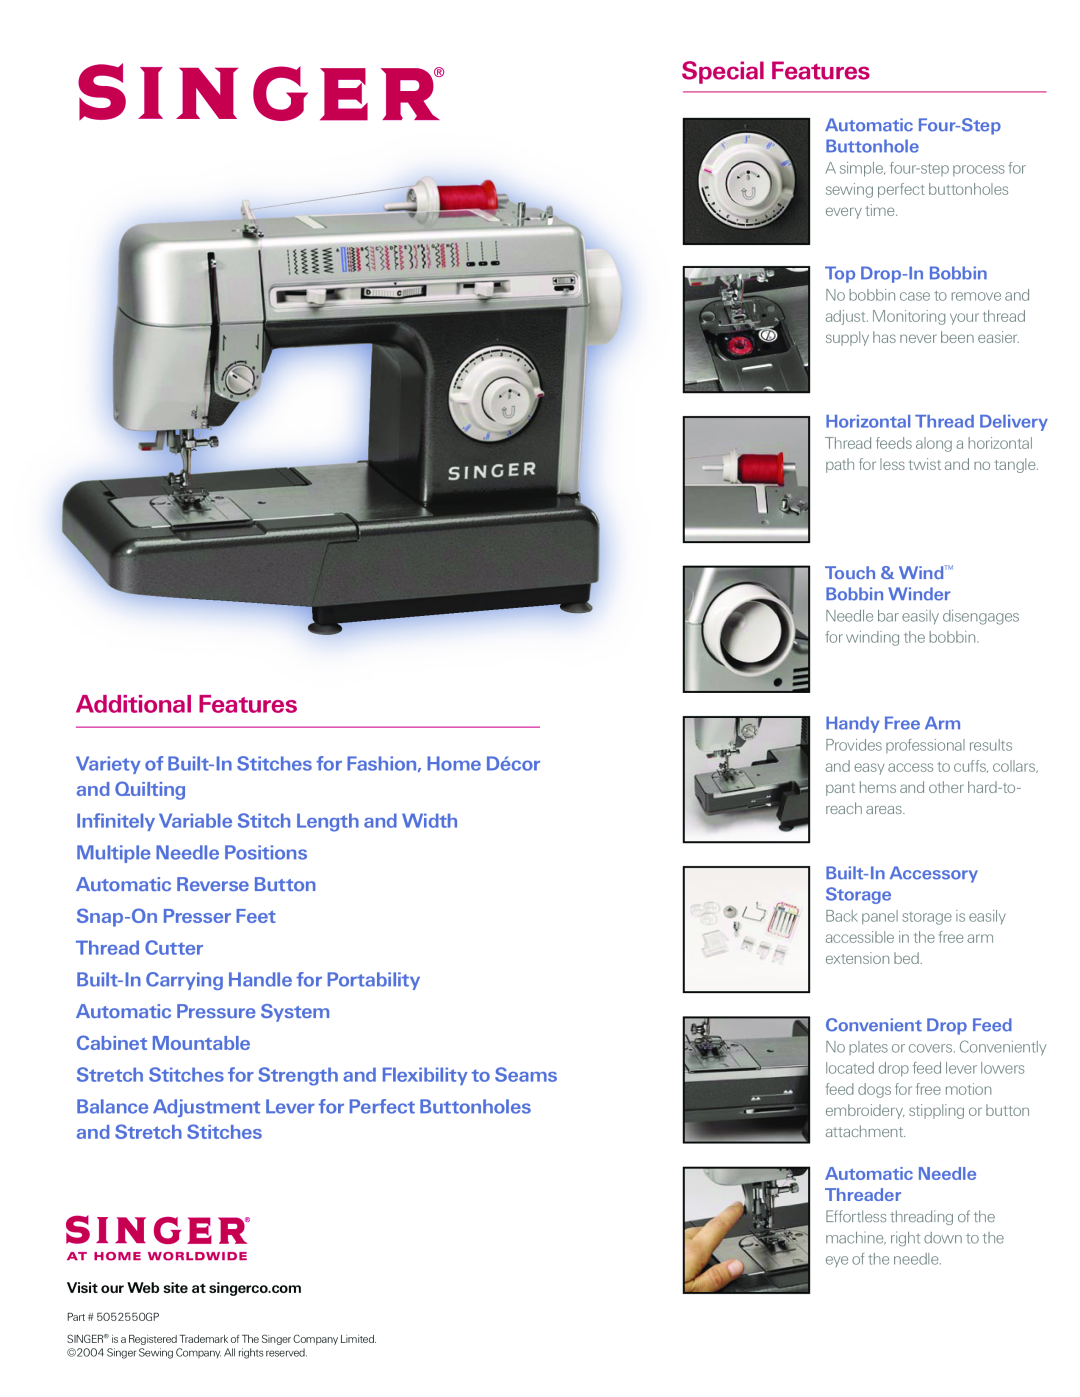 Singer CG-590 Additional Features, Special Features, Variety of Built-In Stitches for Fashion, Home Décor and Quilting 